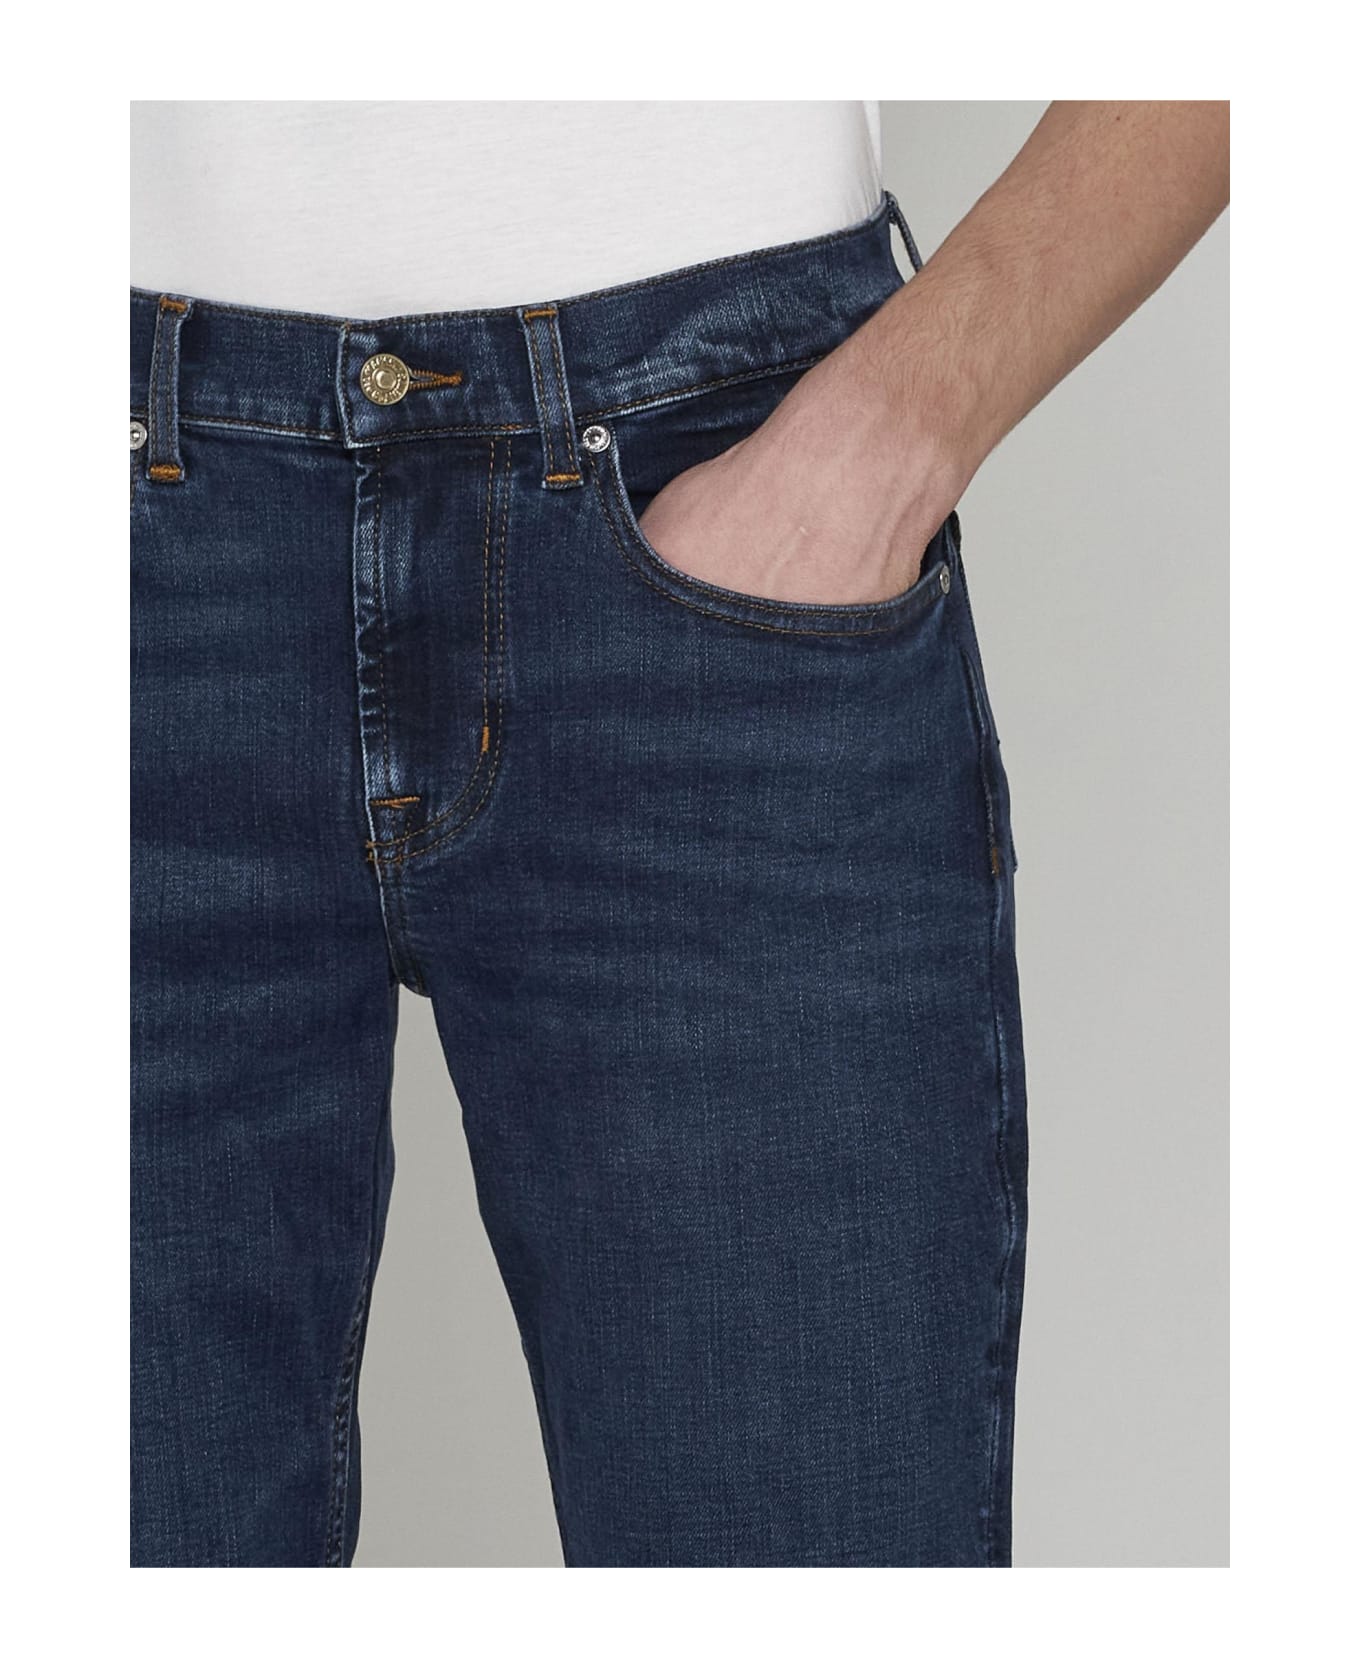 7 For All Mankind Slimmy Tapered Jeans - DENIM BLUE デニム